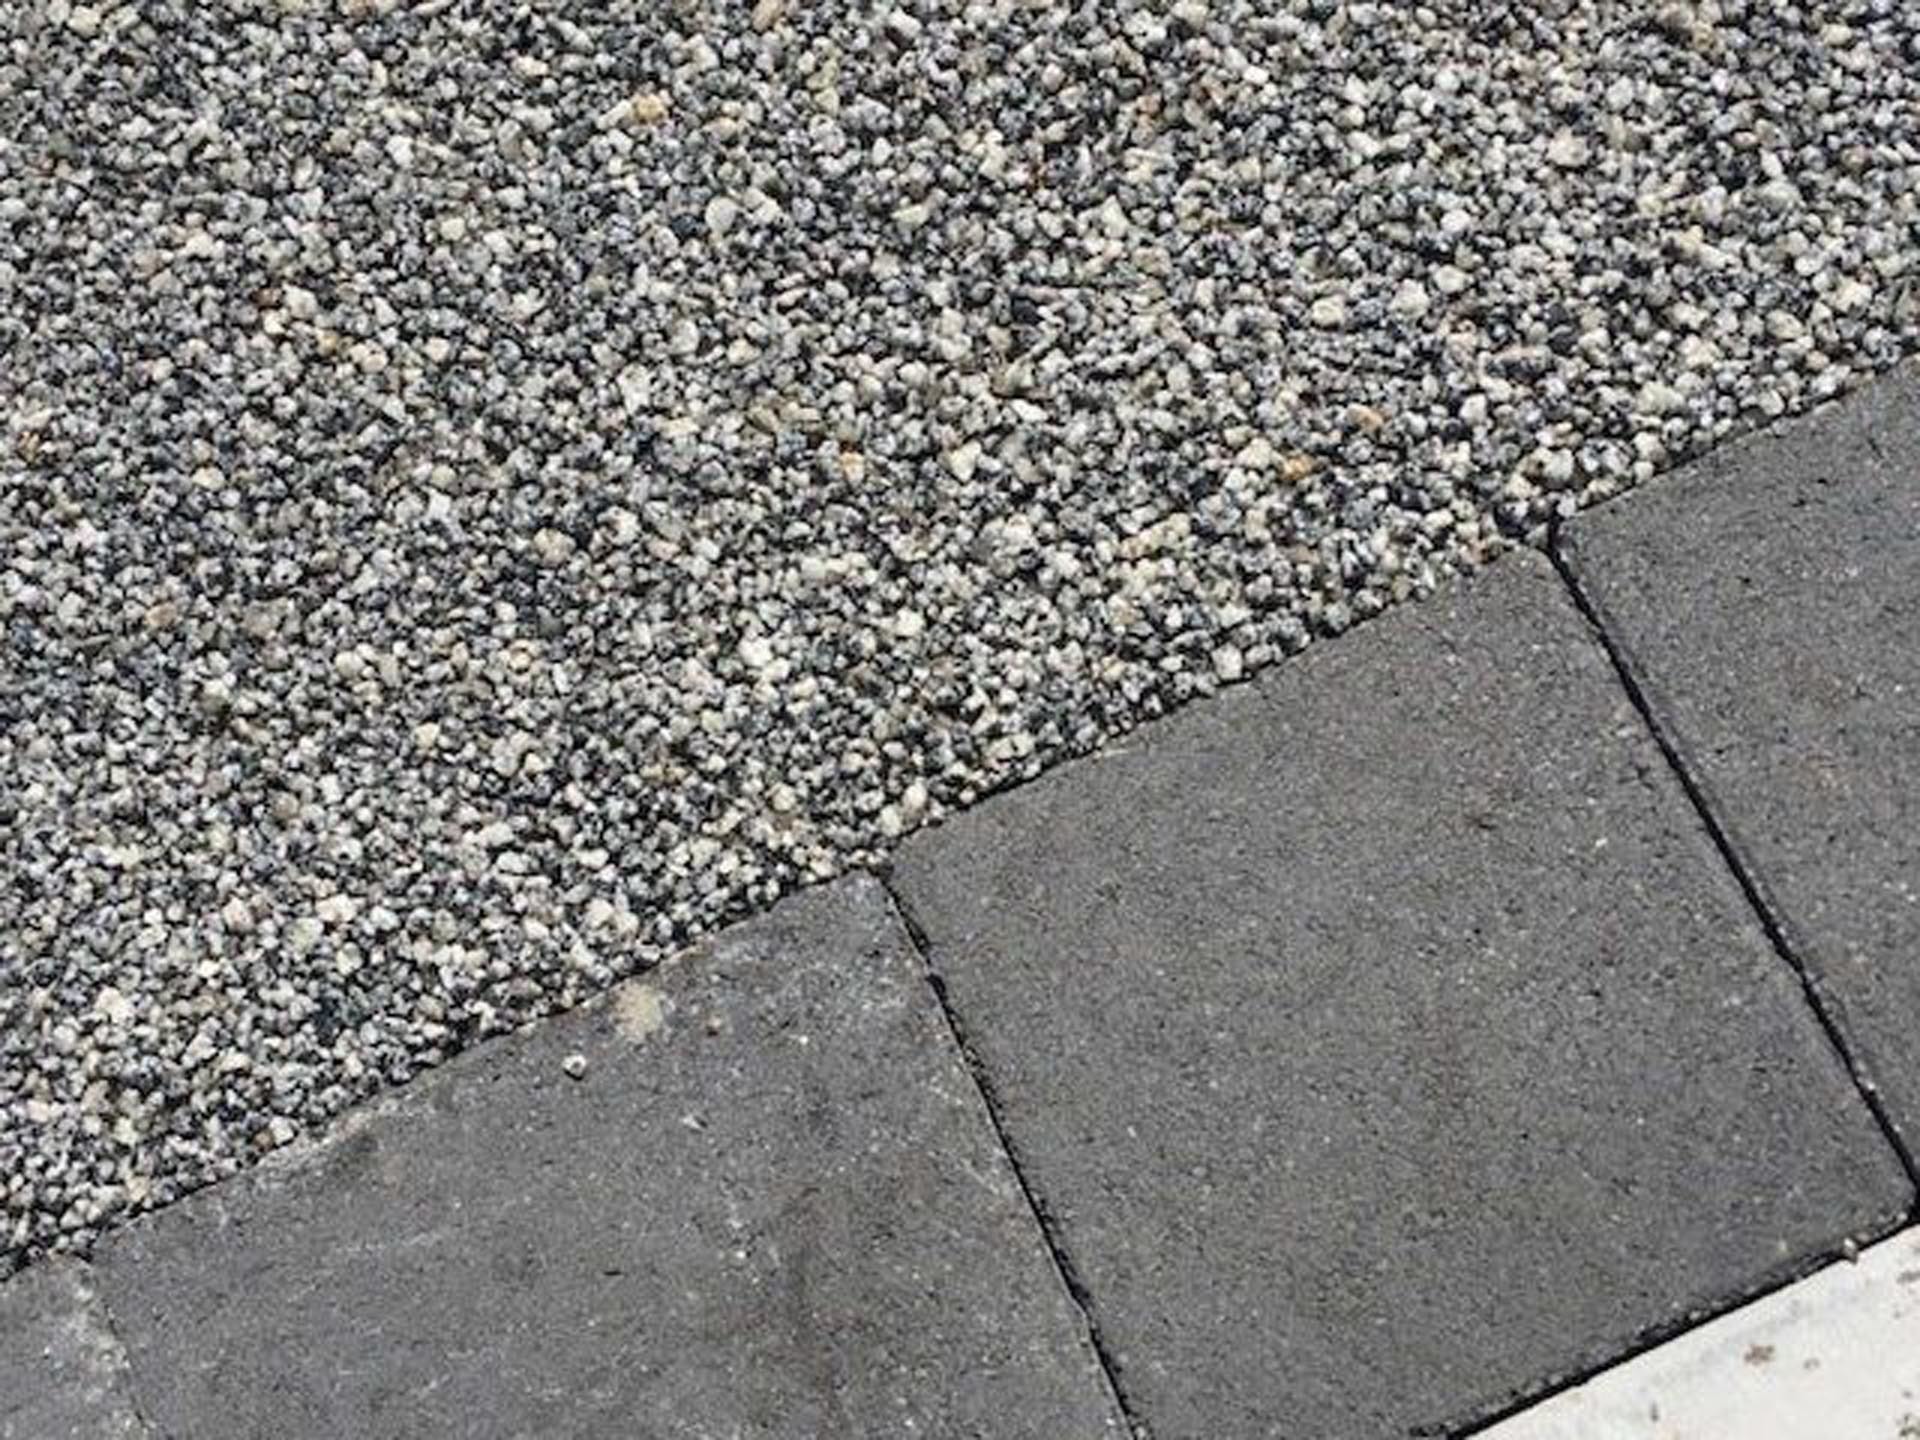 Cambs Paving - Resin Bonded driveways specialists throughout Cambridgeshire